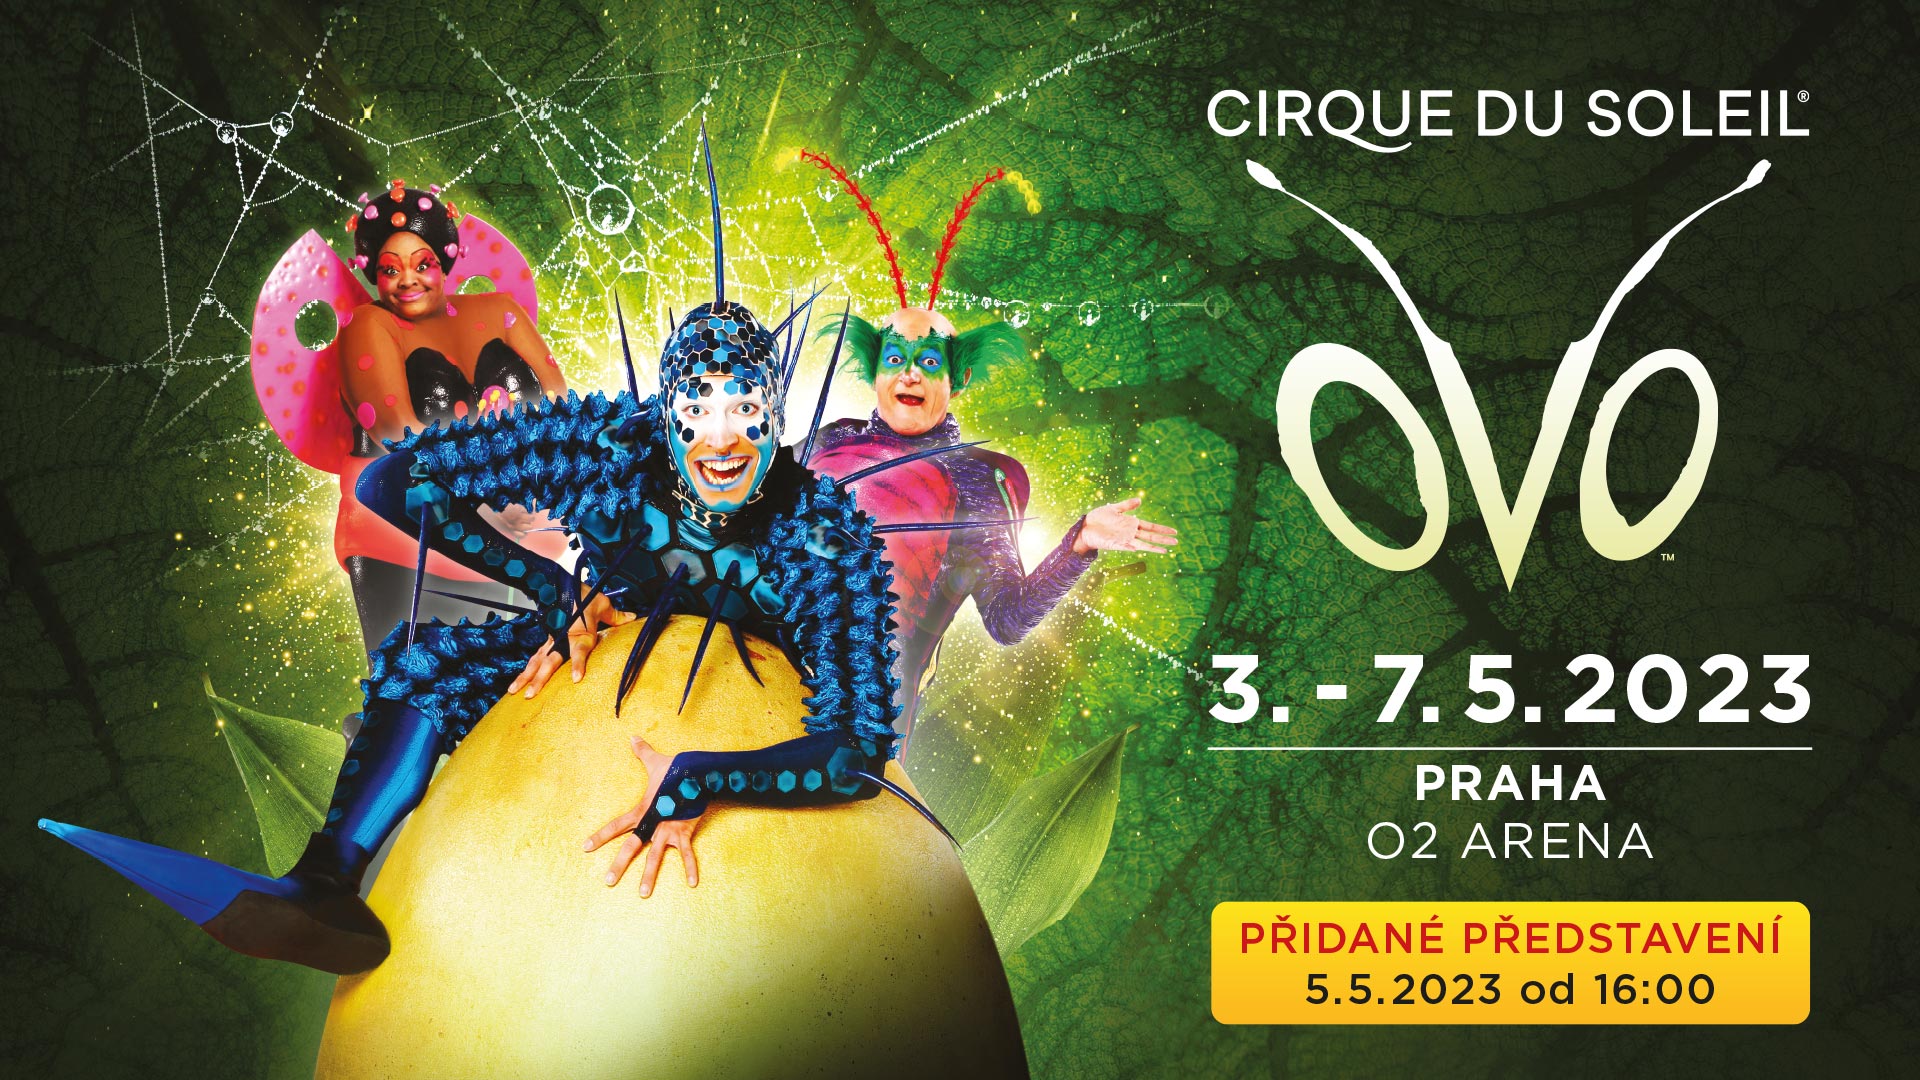 Thumbnail # Cirque du Soleil adds another performance date at the O2 Arena